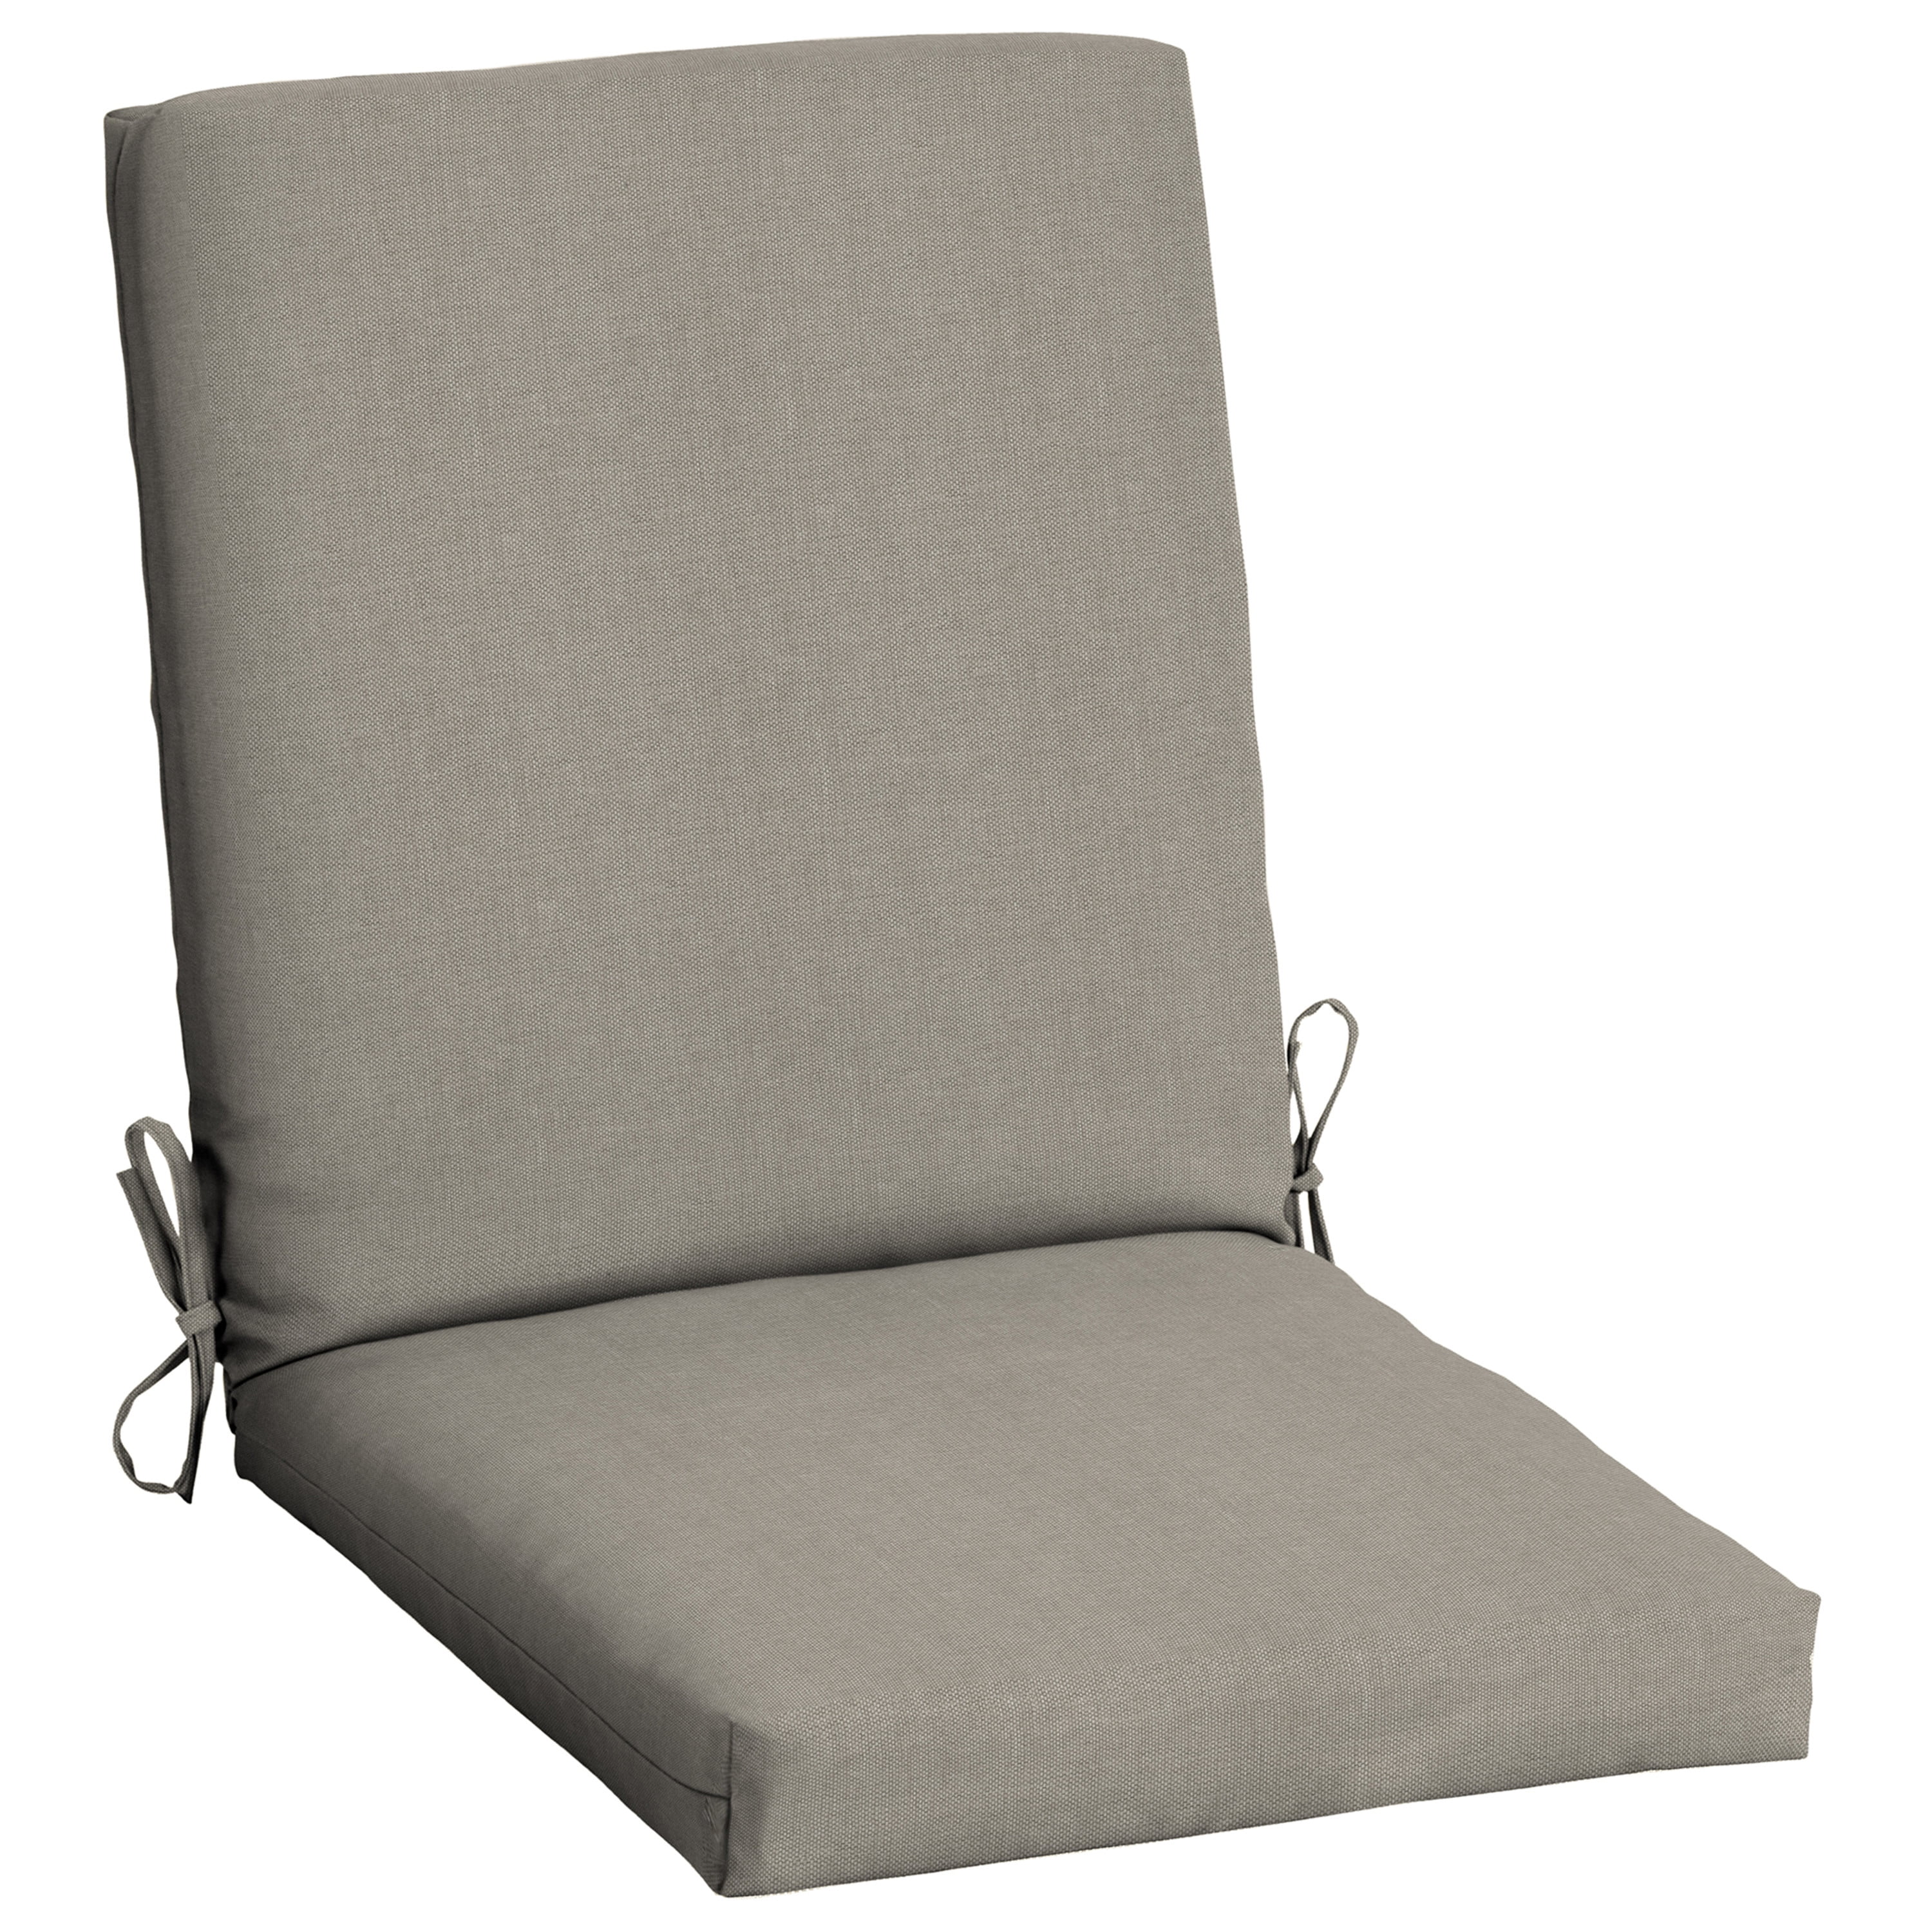 Mainstays 43" x 20" Solid Tan Rectangle Patio Chair Cushion, 1 Piece